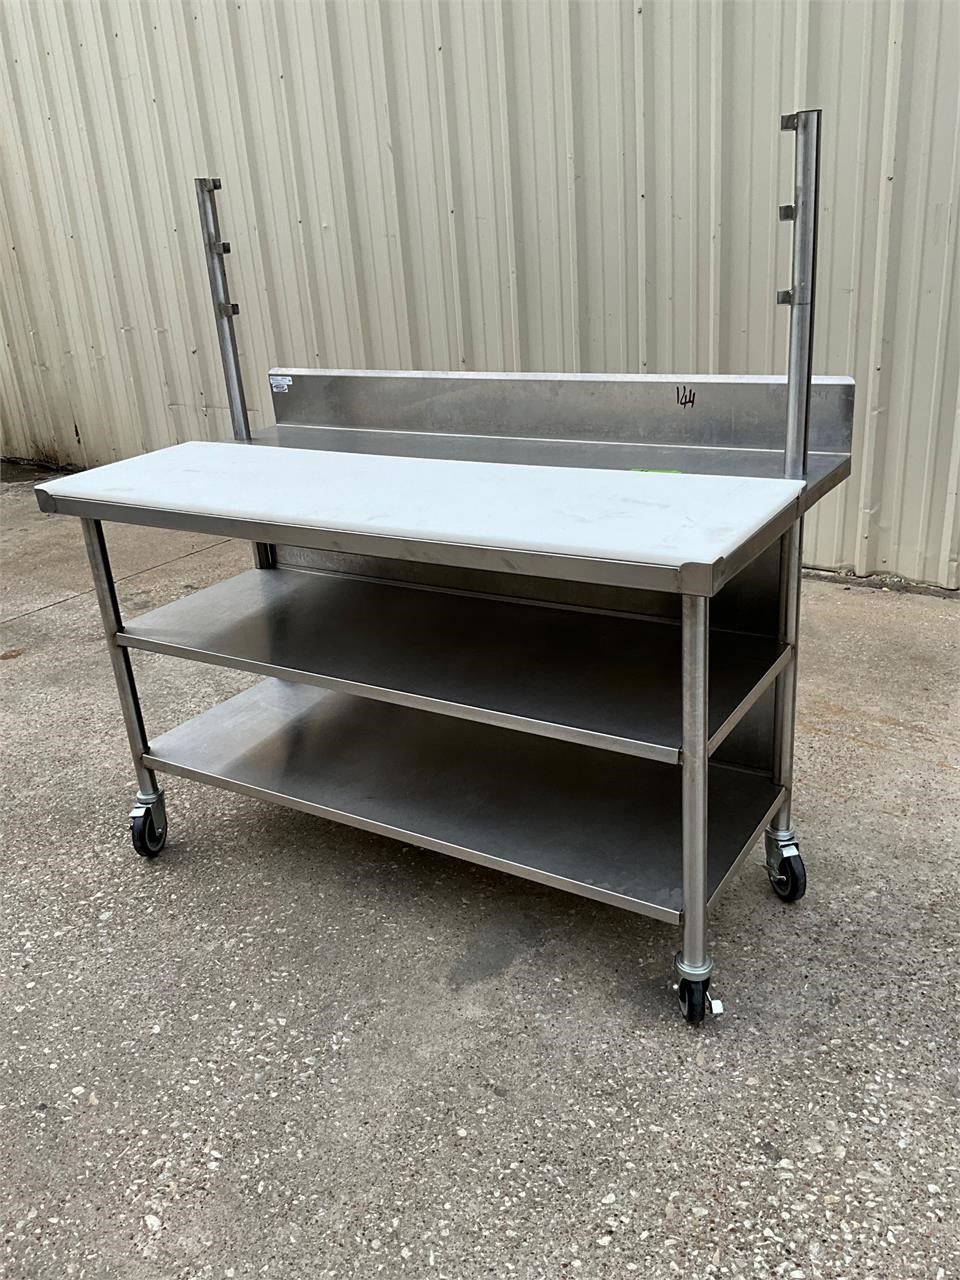 60” Winholt stainless steel poly top table